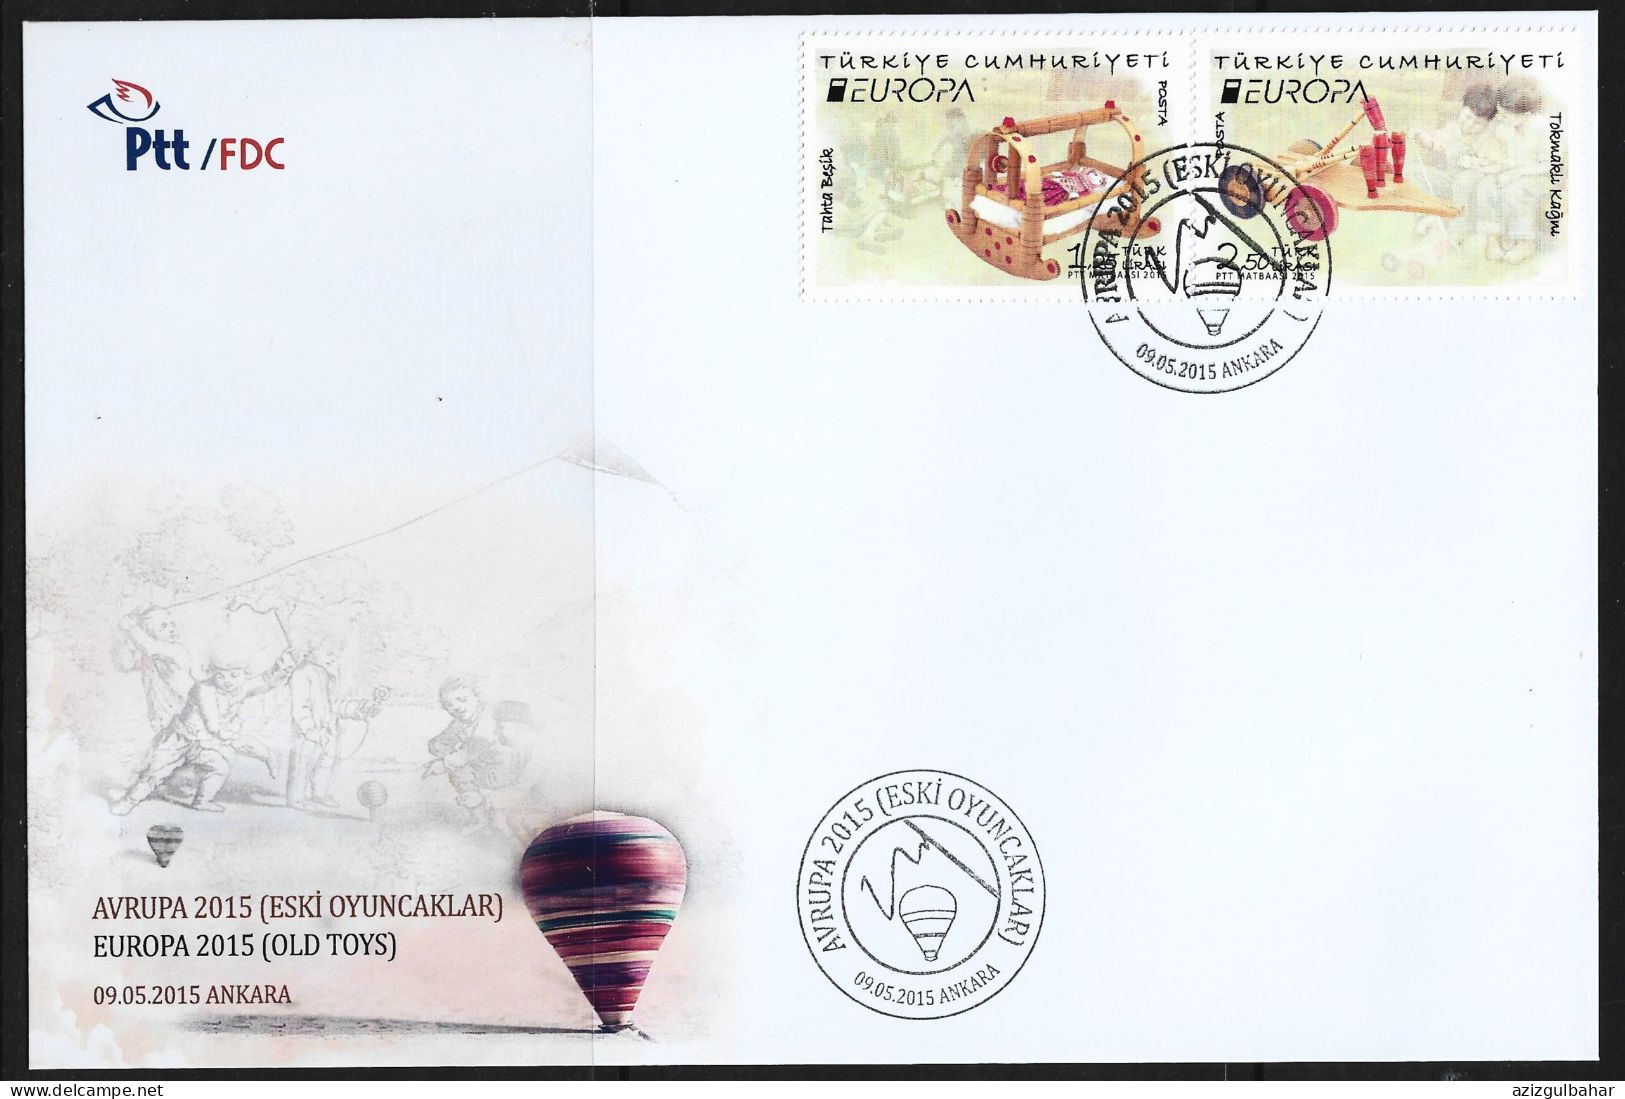 2015 - EUROPA - OLD TOYS -  9 MAY 2015- FDC - FDC